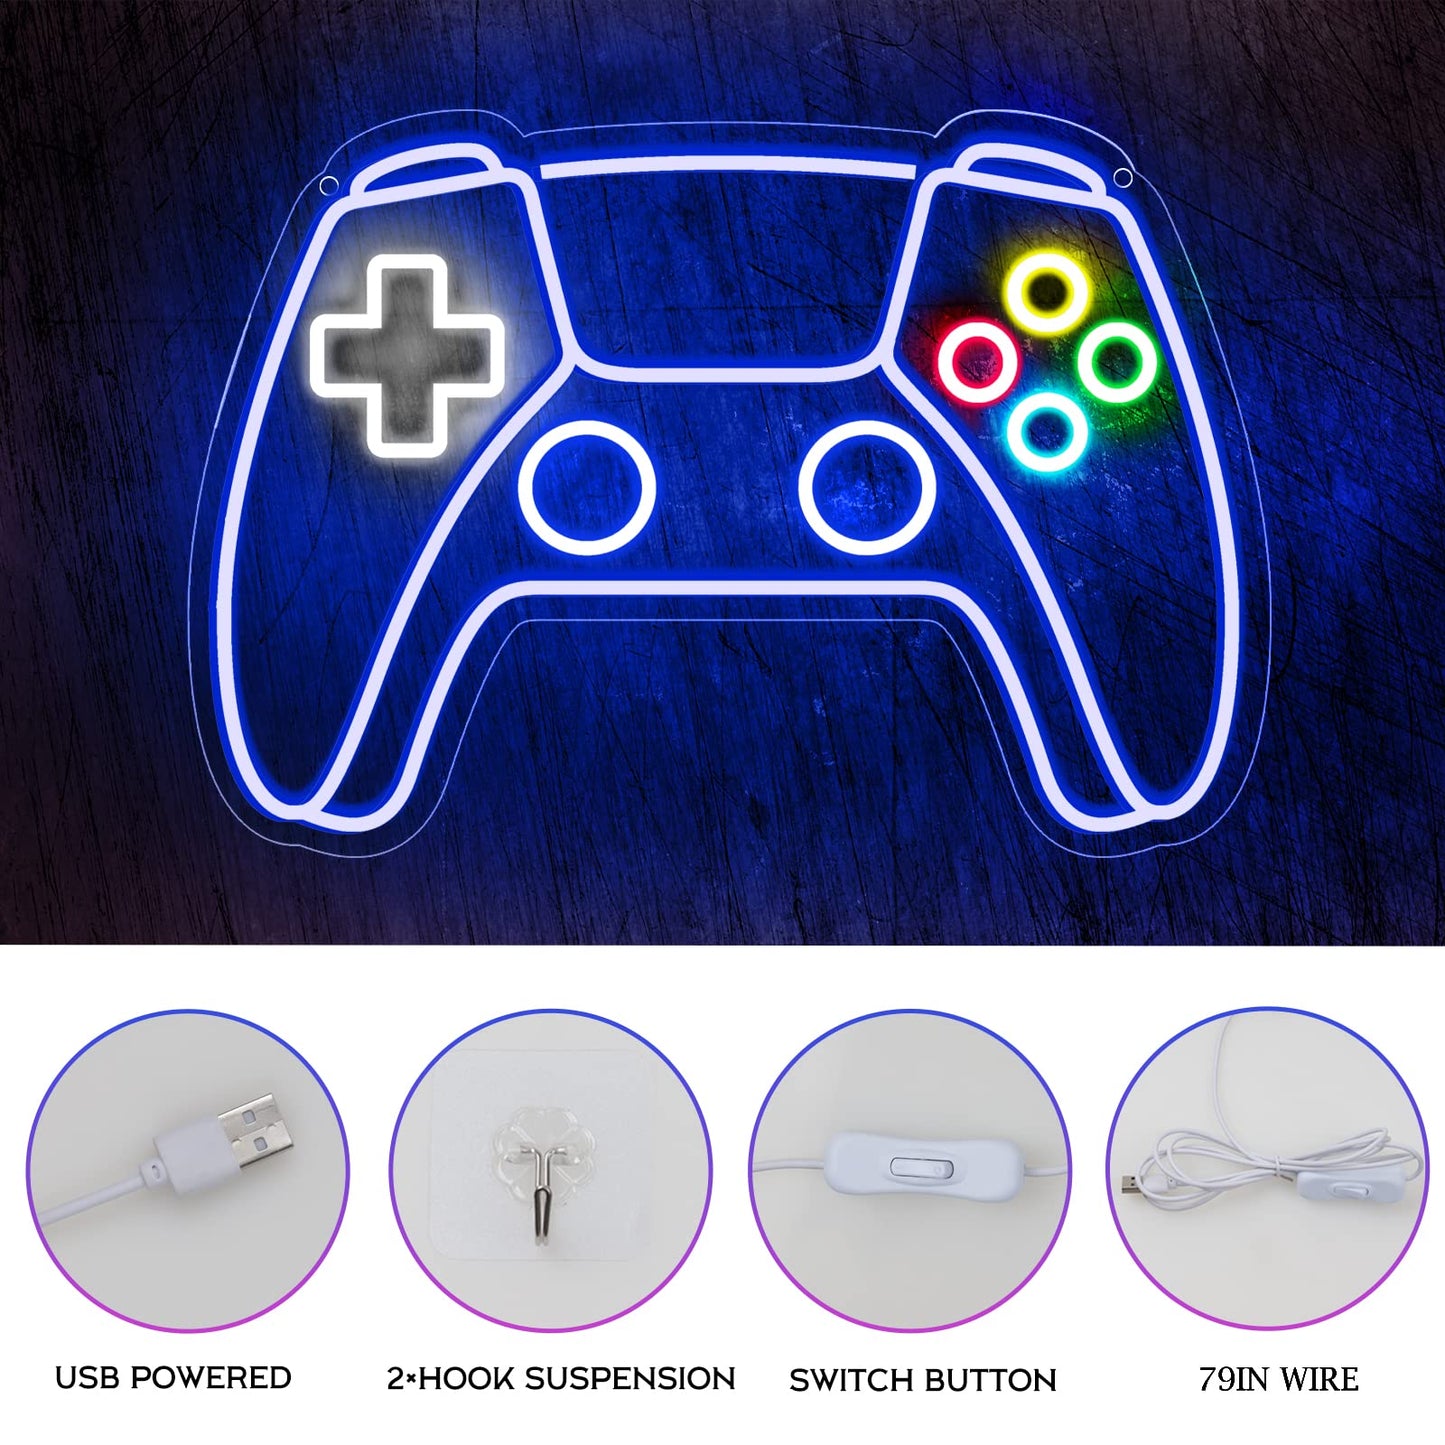 Gamer Neon Sign, Gamepad Shaped LED Neon Sign for Gamer Room Decor, Gaming Neon Sign for Boys Room Decor, Neon Gaming Sign for Gaming Wall Decor, USB Powered Gamer Gifts for Teens, Boys, Kids - amzGamess